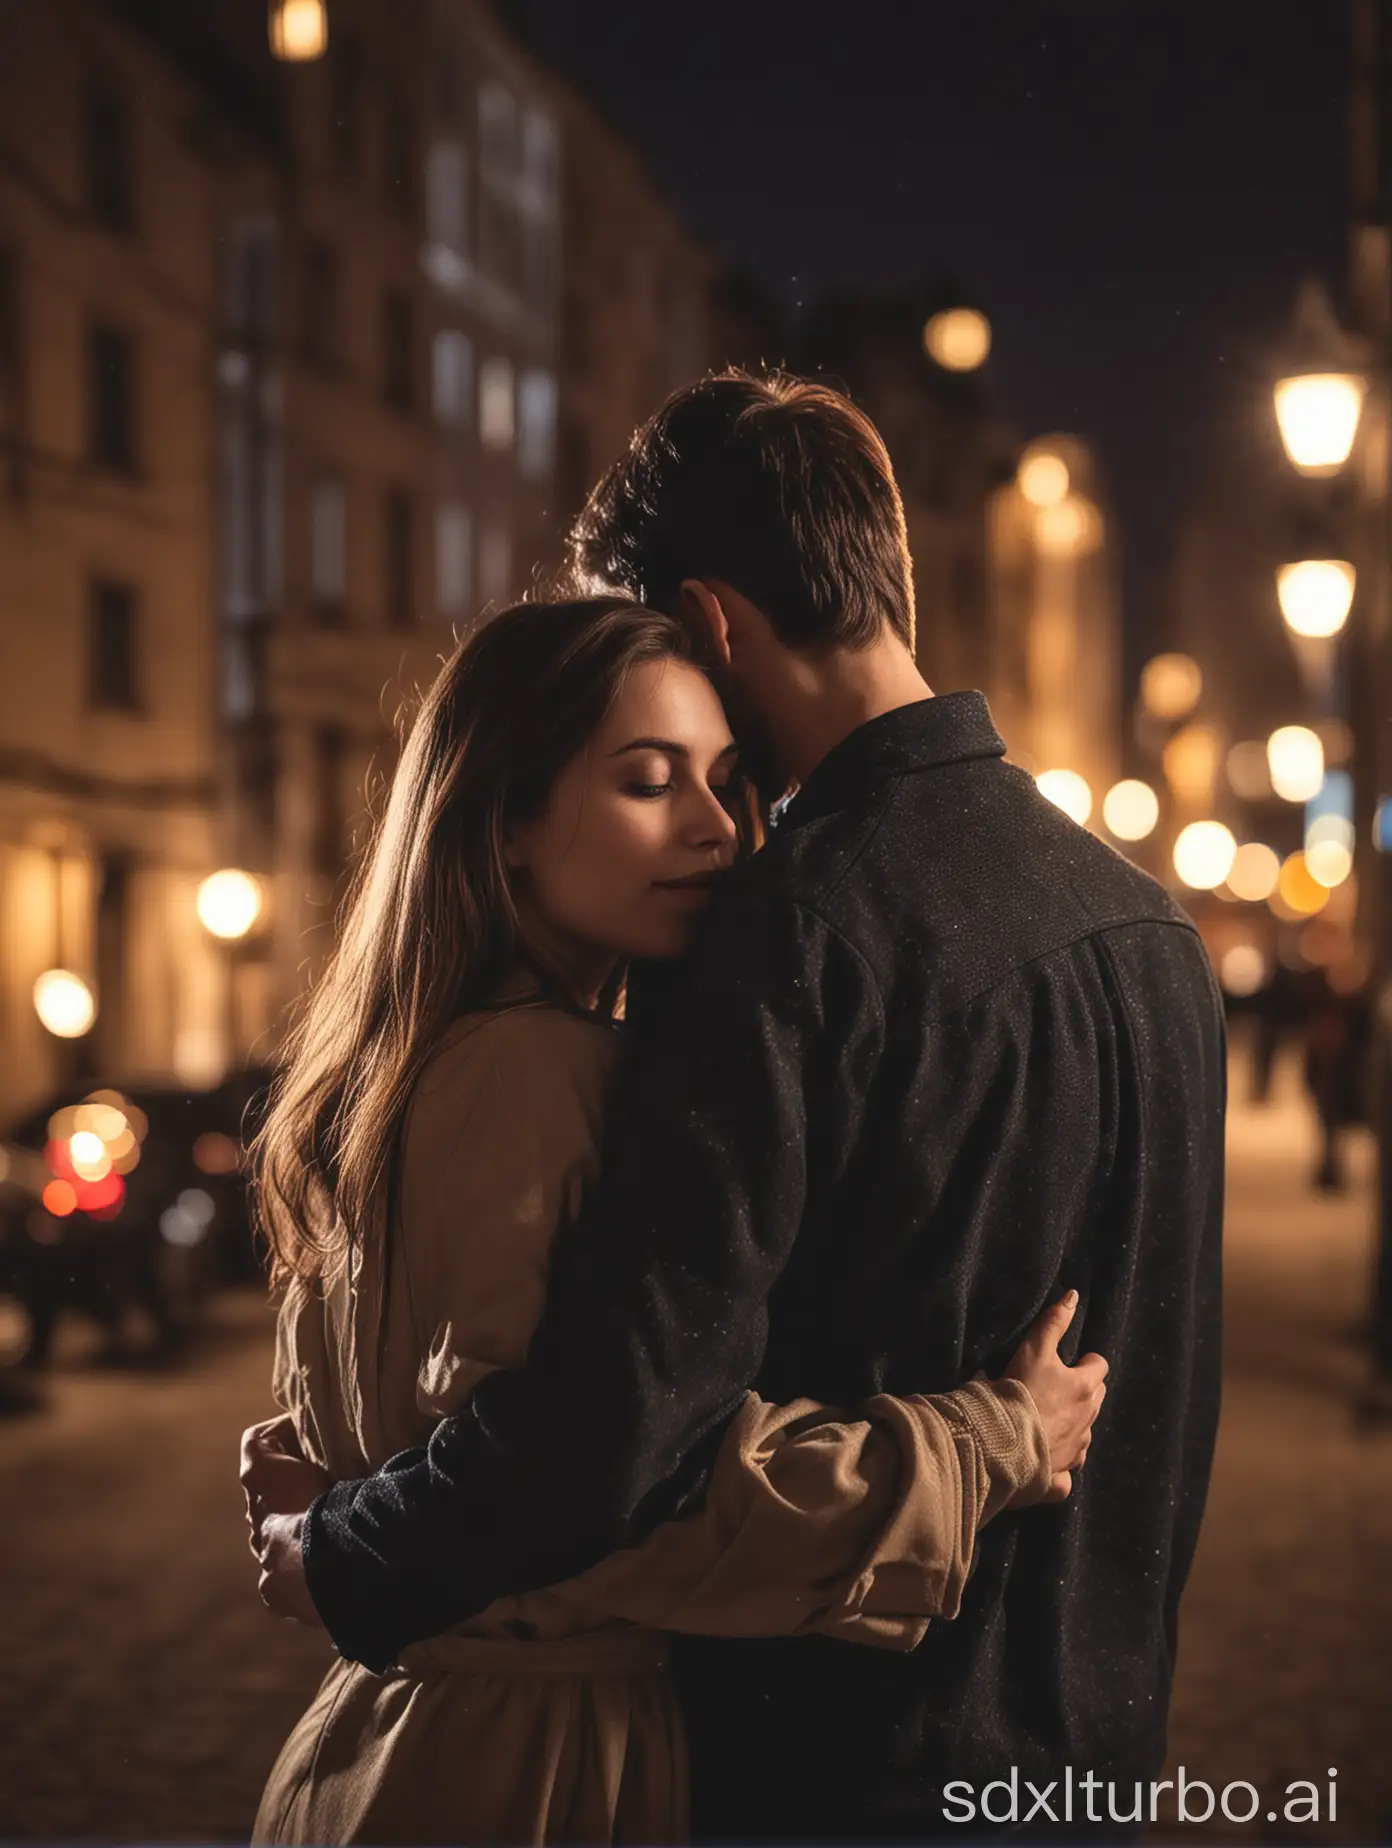 Romantic-Couple-Embracing-in-City-Lights-Bokeh